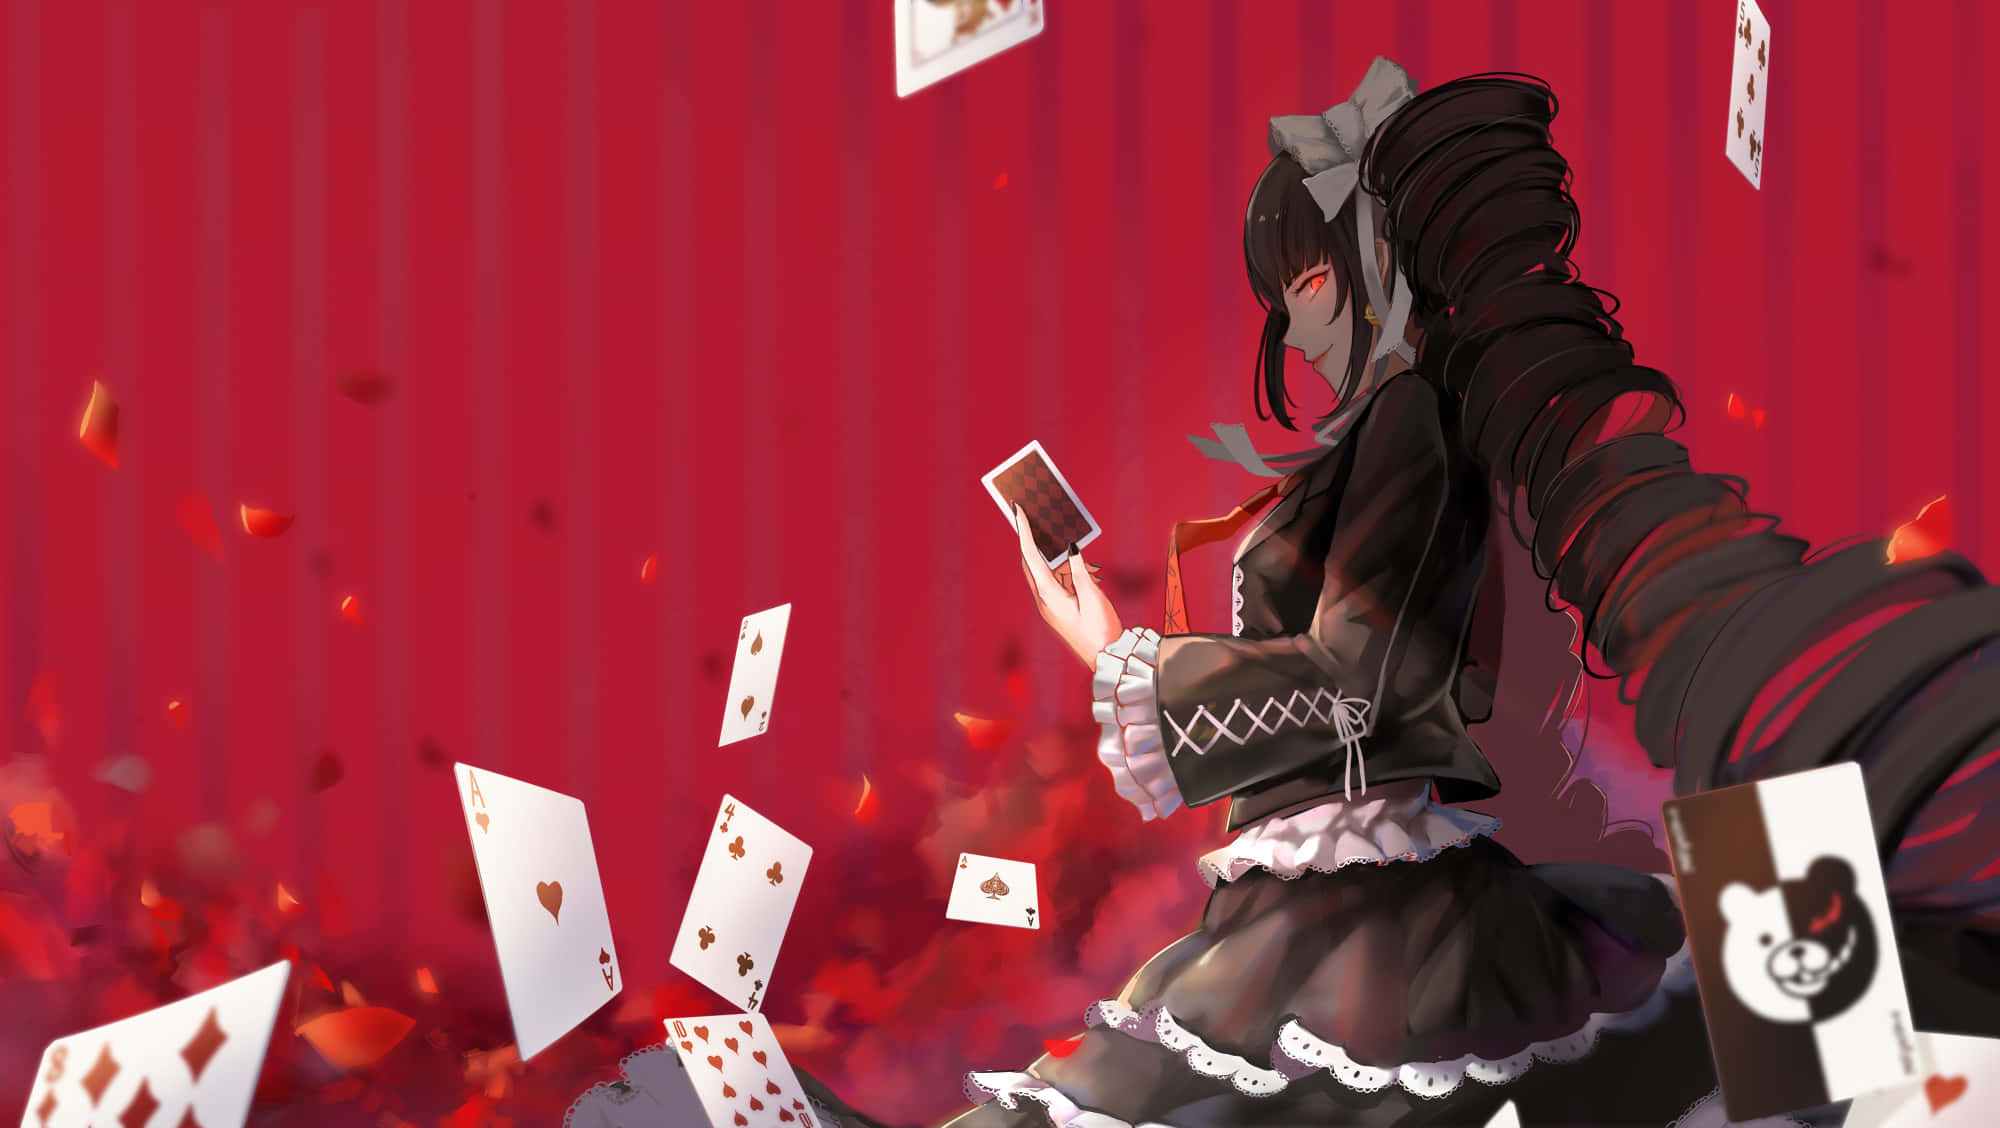 A Girl In A Black Dress Is Holding Playing Cards